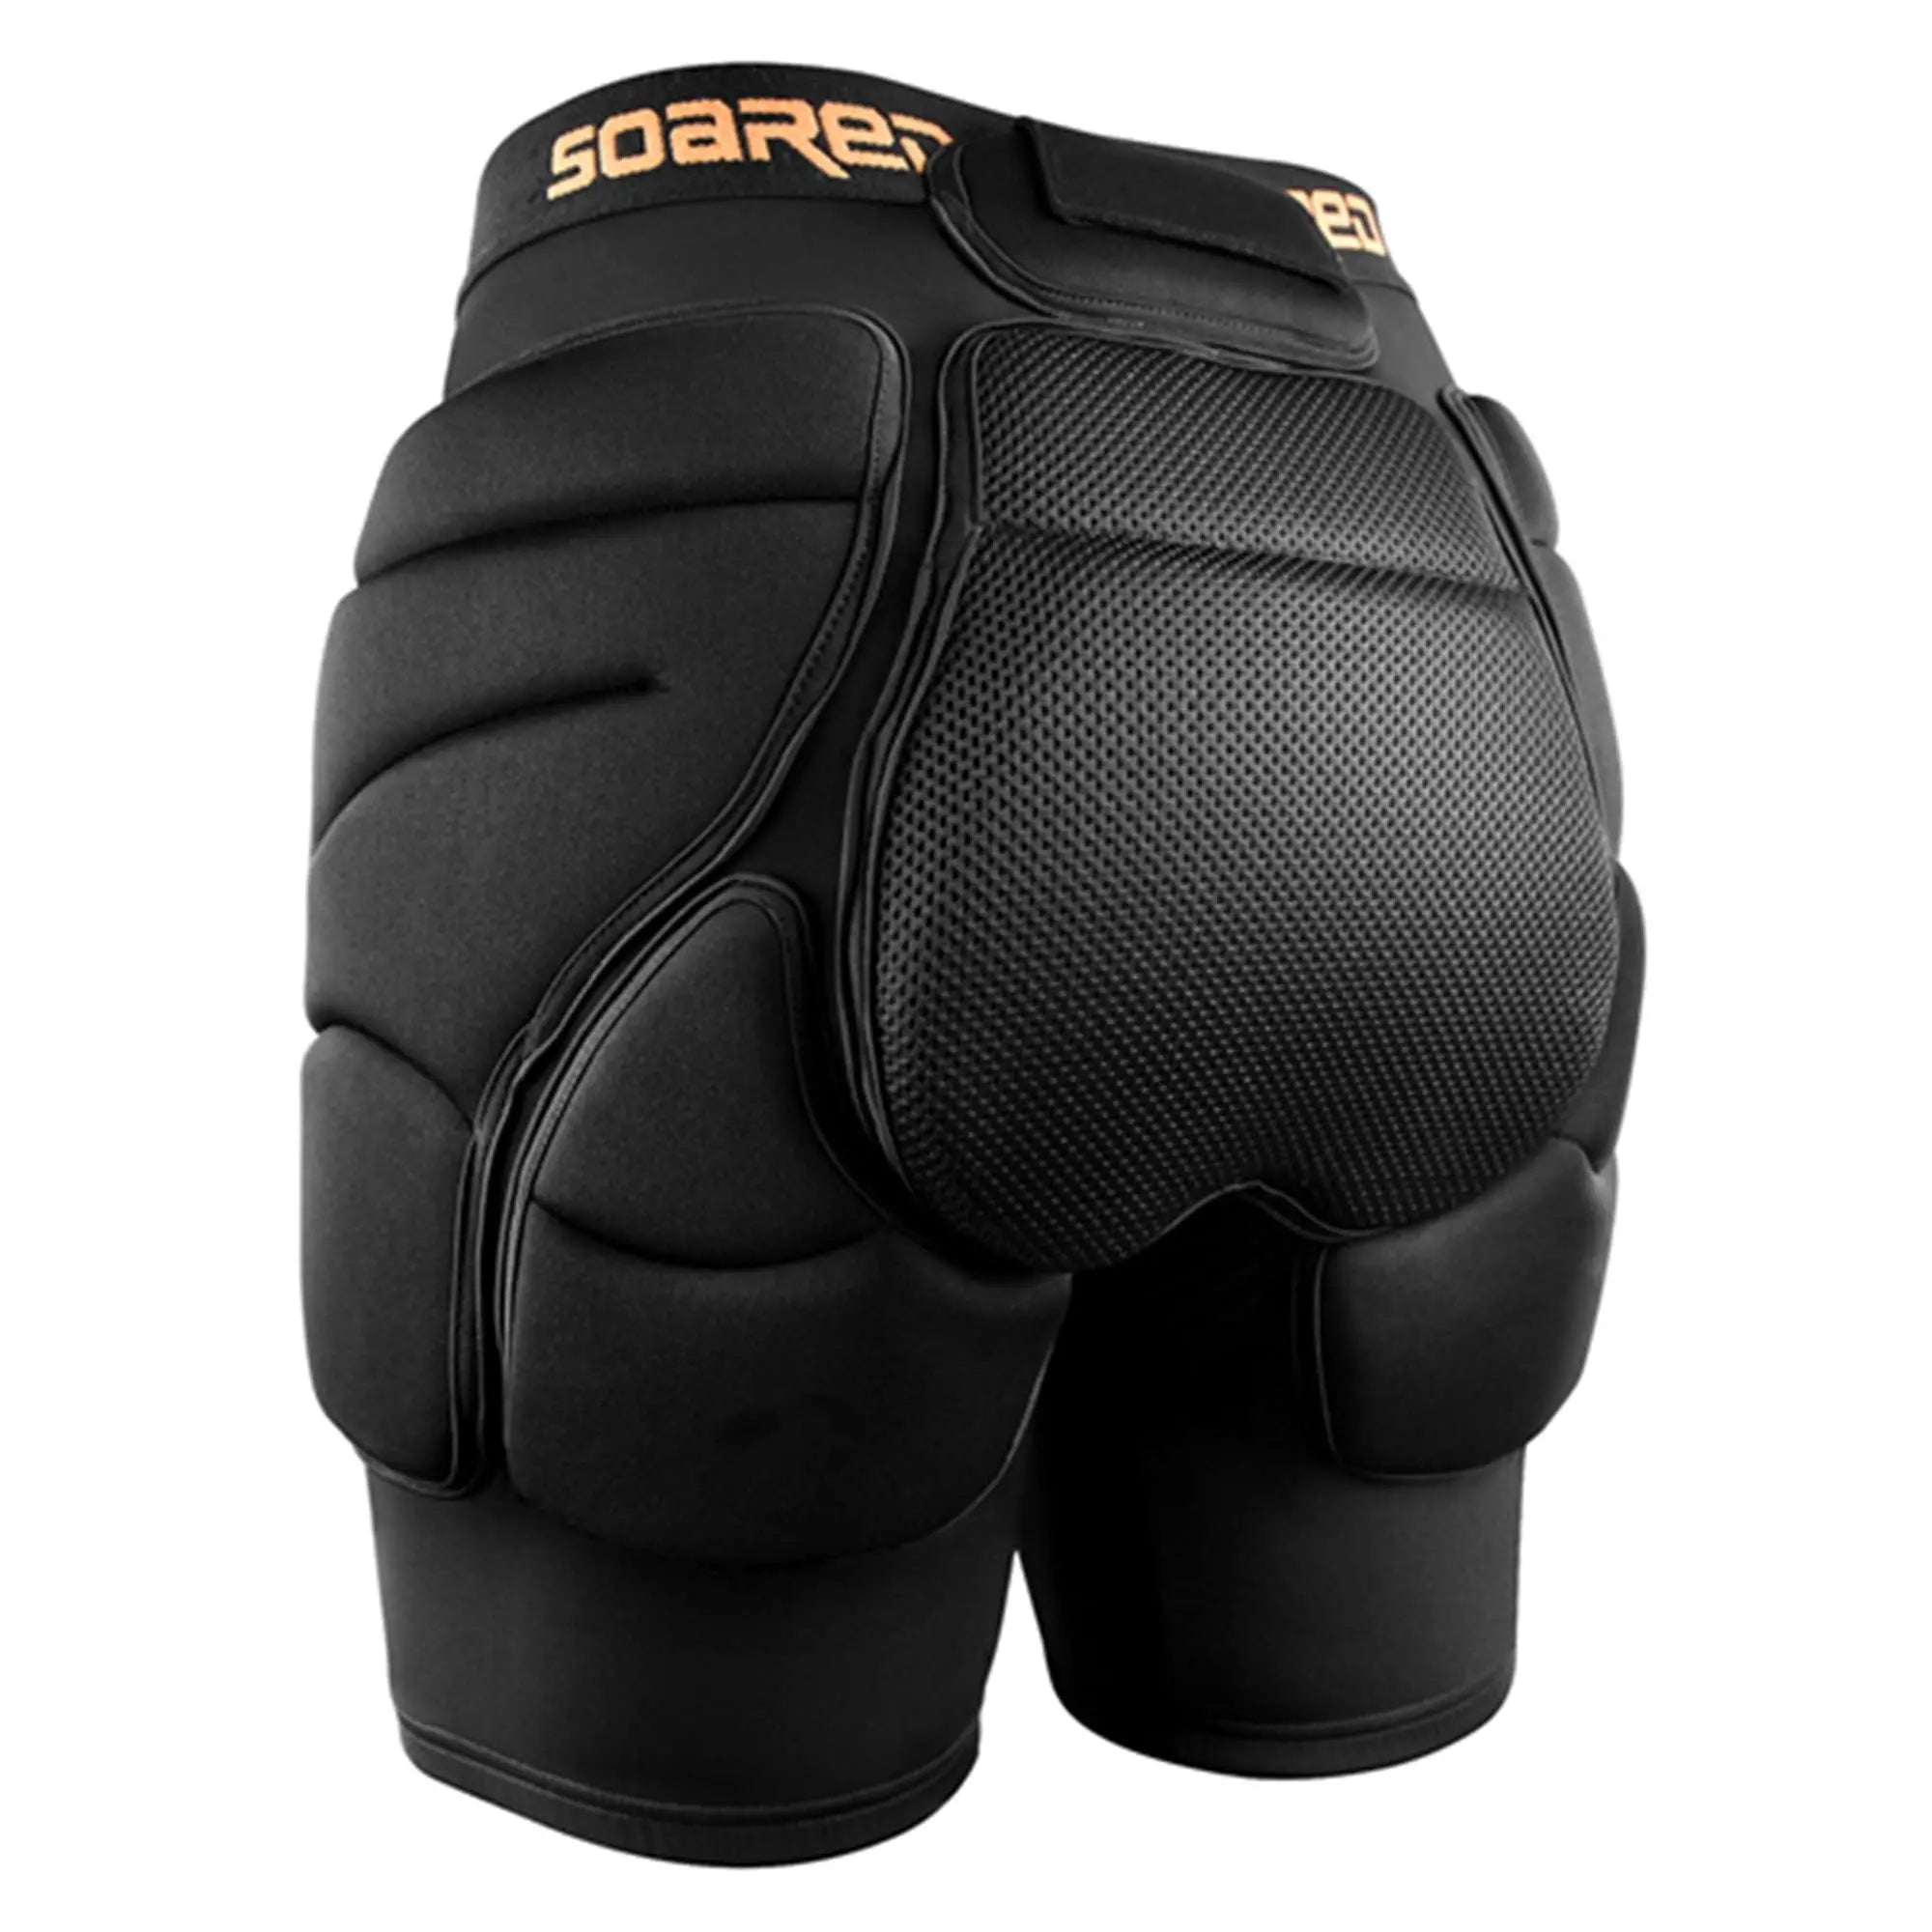 https://cdn.shopify.com/s/files/1/0613/3638/7765/products/Soared-3D-Protection-Hip-Butt-XPE-Padded-Shorts-for-ski_-ice-Skating_-Snowboarding_-Skateboard-for-Men-Women-SOARED-1667960698.jpg?v=1667960704